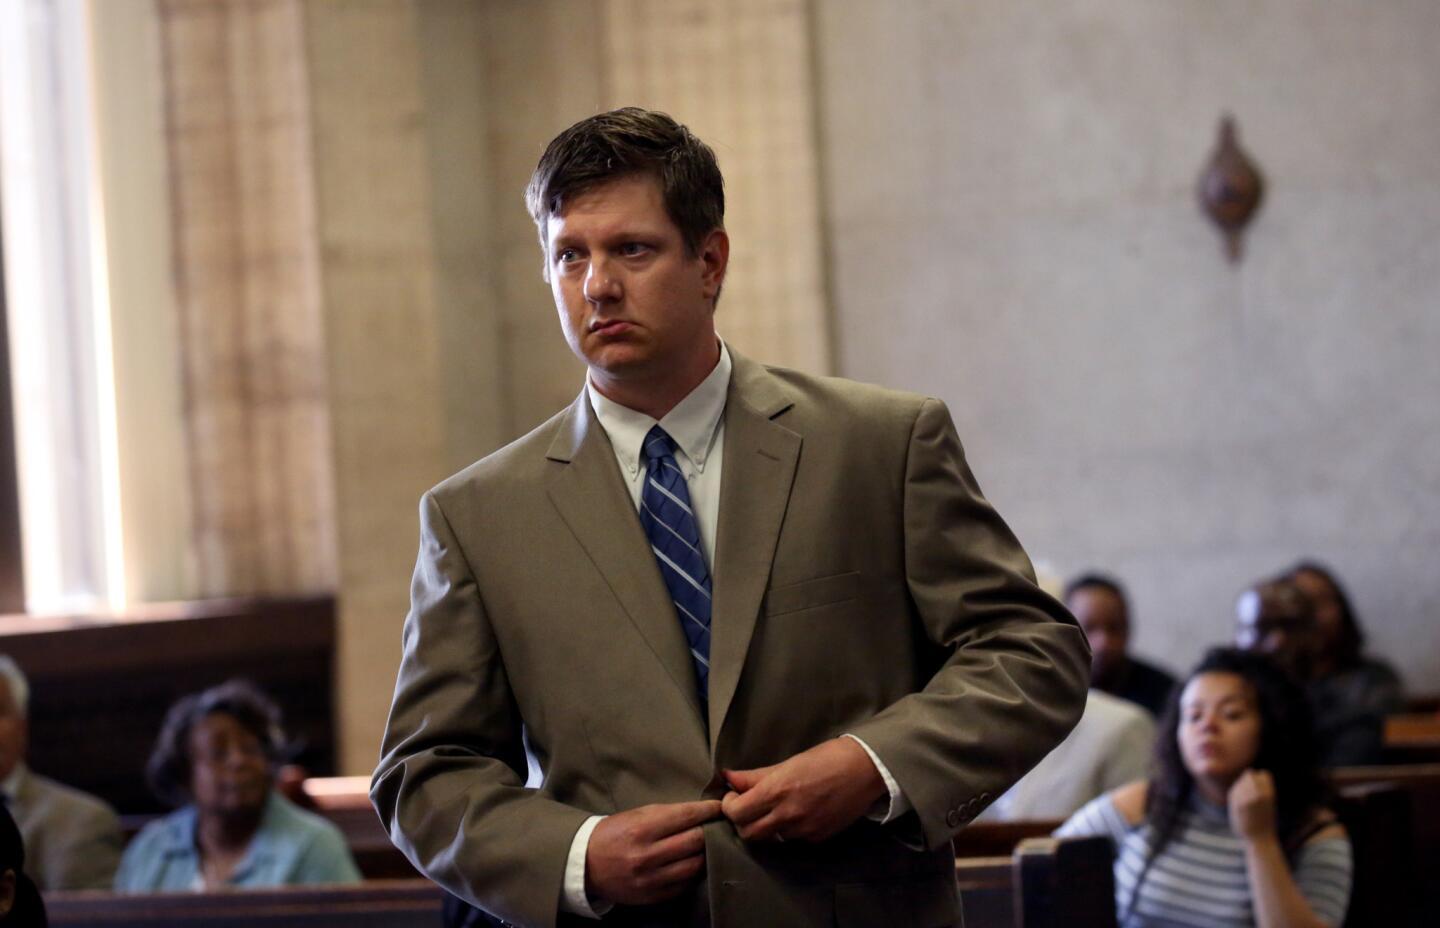 Jason Van Dyke approaches the bench of Judge Vincent Gaughan at Leighton Criminal Courts Building in Chicago on June 30, 2016, for a hearing to discuss the special prosecutor in Van Dyke's upcoming trial.